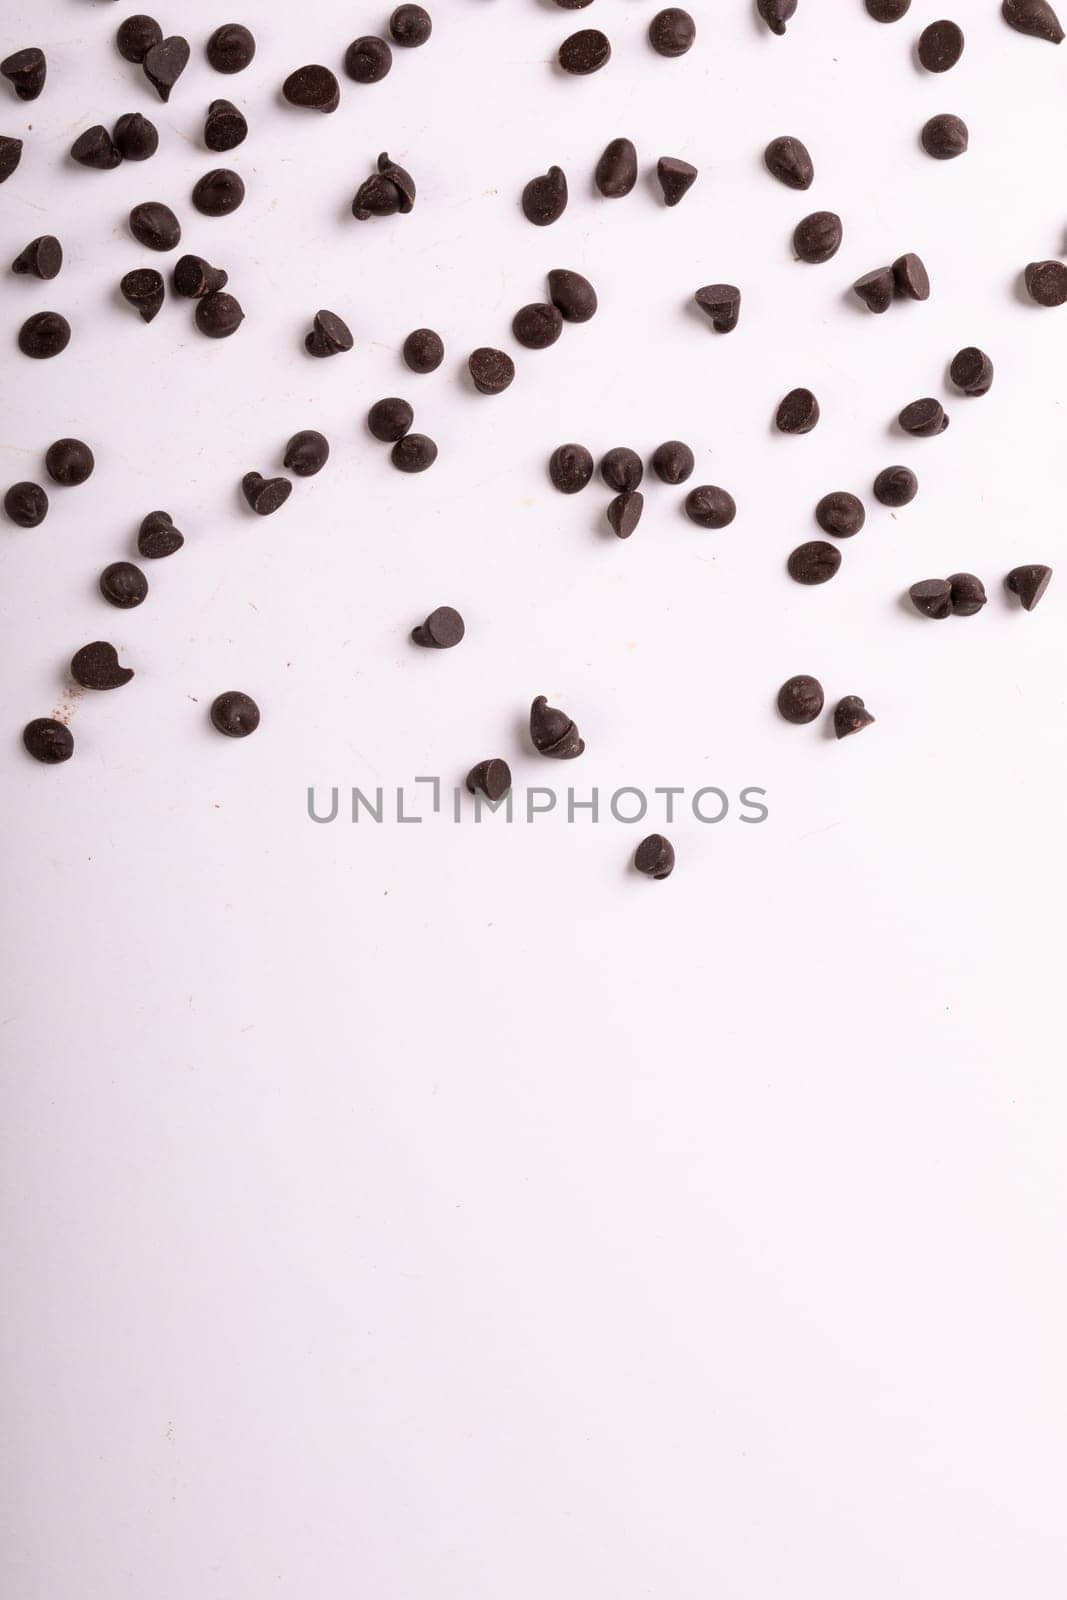 Directly above view of fresh chocolate chips scattered over copy space on white background by Wavebreakmedia